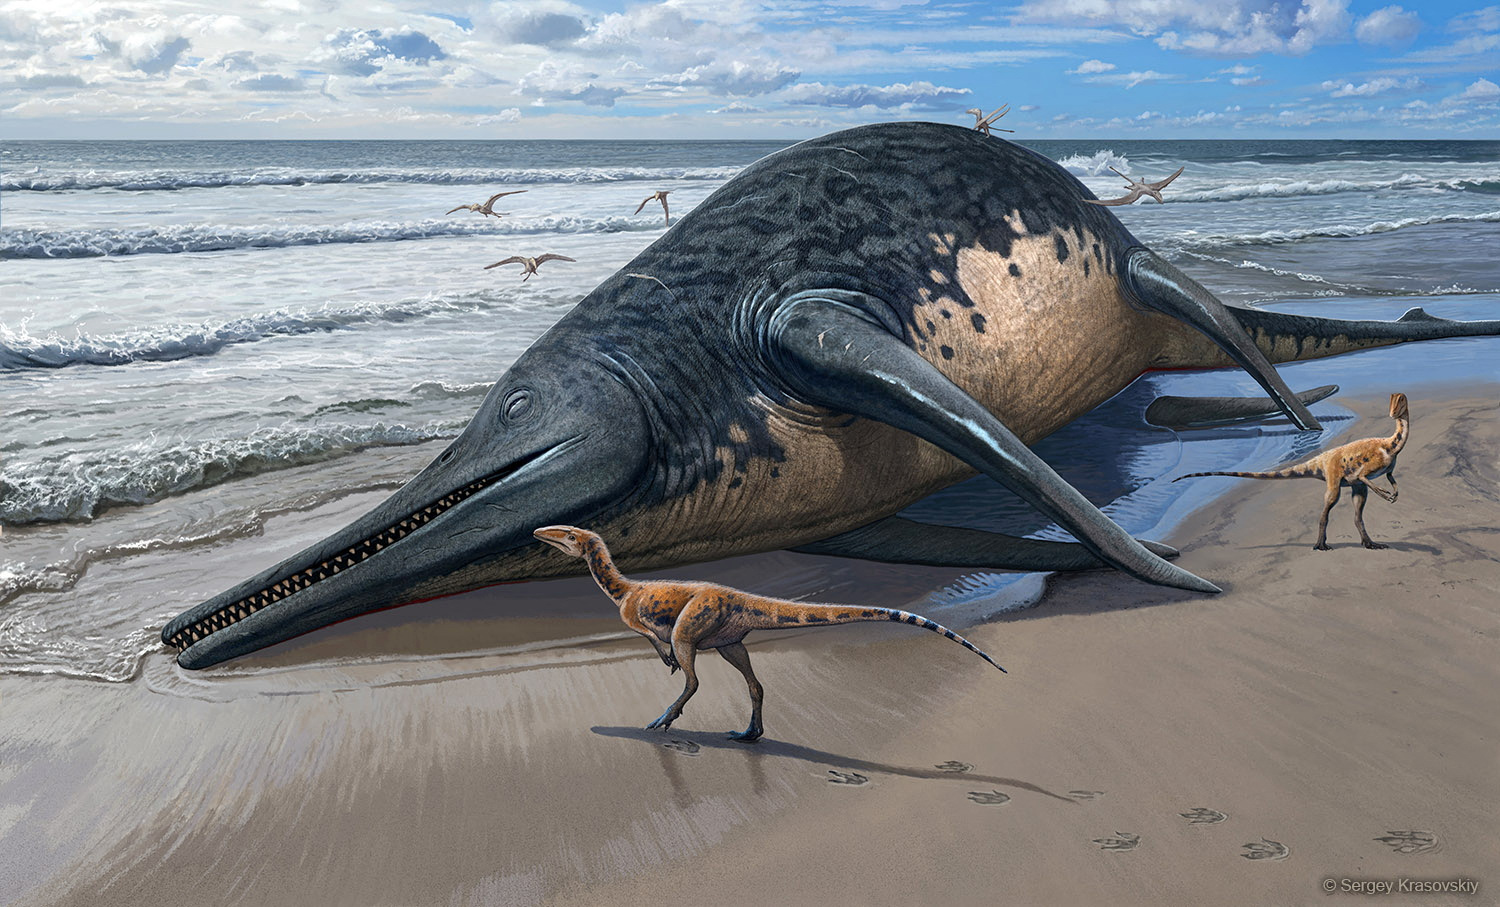 This illustration shows the washed-up carcass of  a Ichthyotitan severnensis, a newly identified species of marine reptile that lived 202 million years ago based on fossils discovered at Somerset,  England